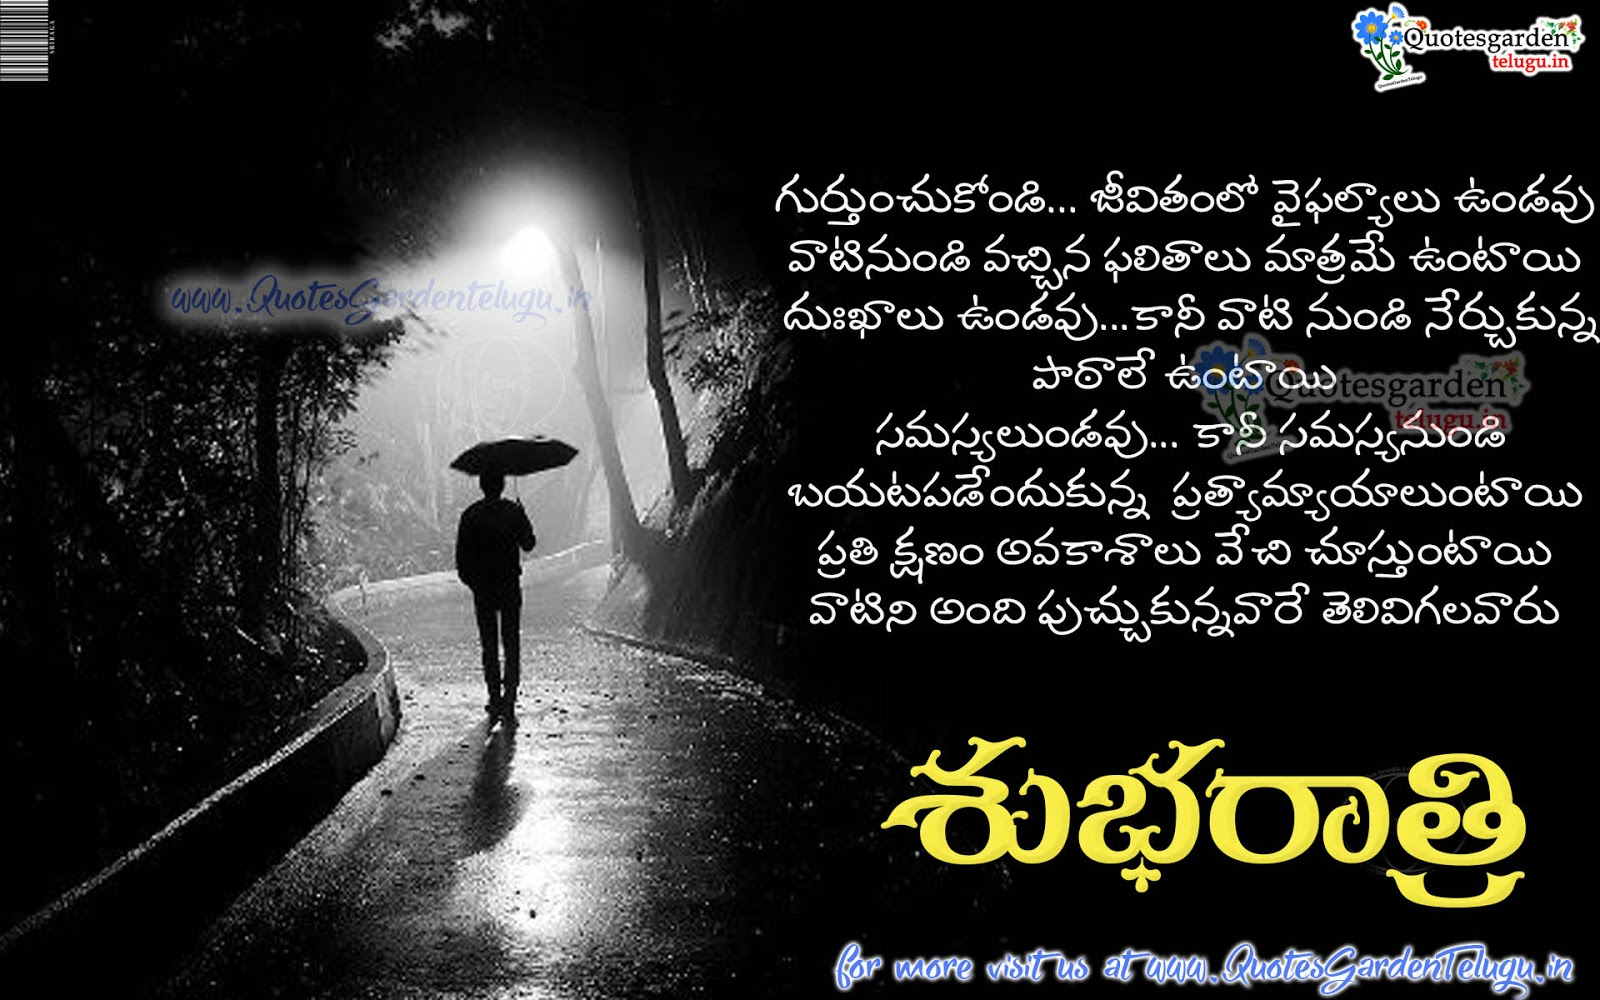 Telugu Good night Quotes with life motivating messages | QUOTES ...